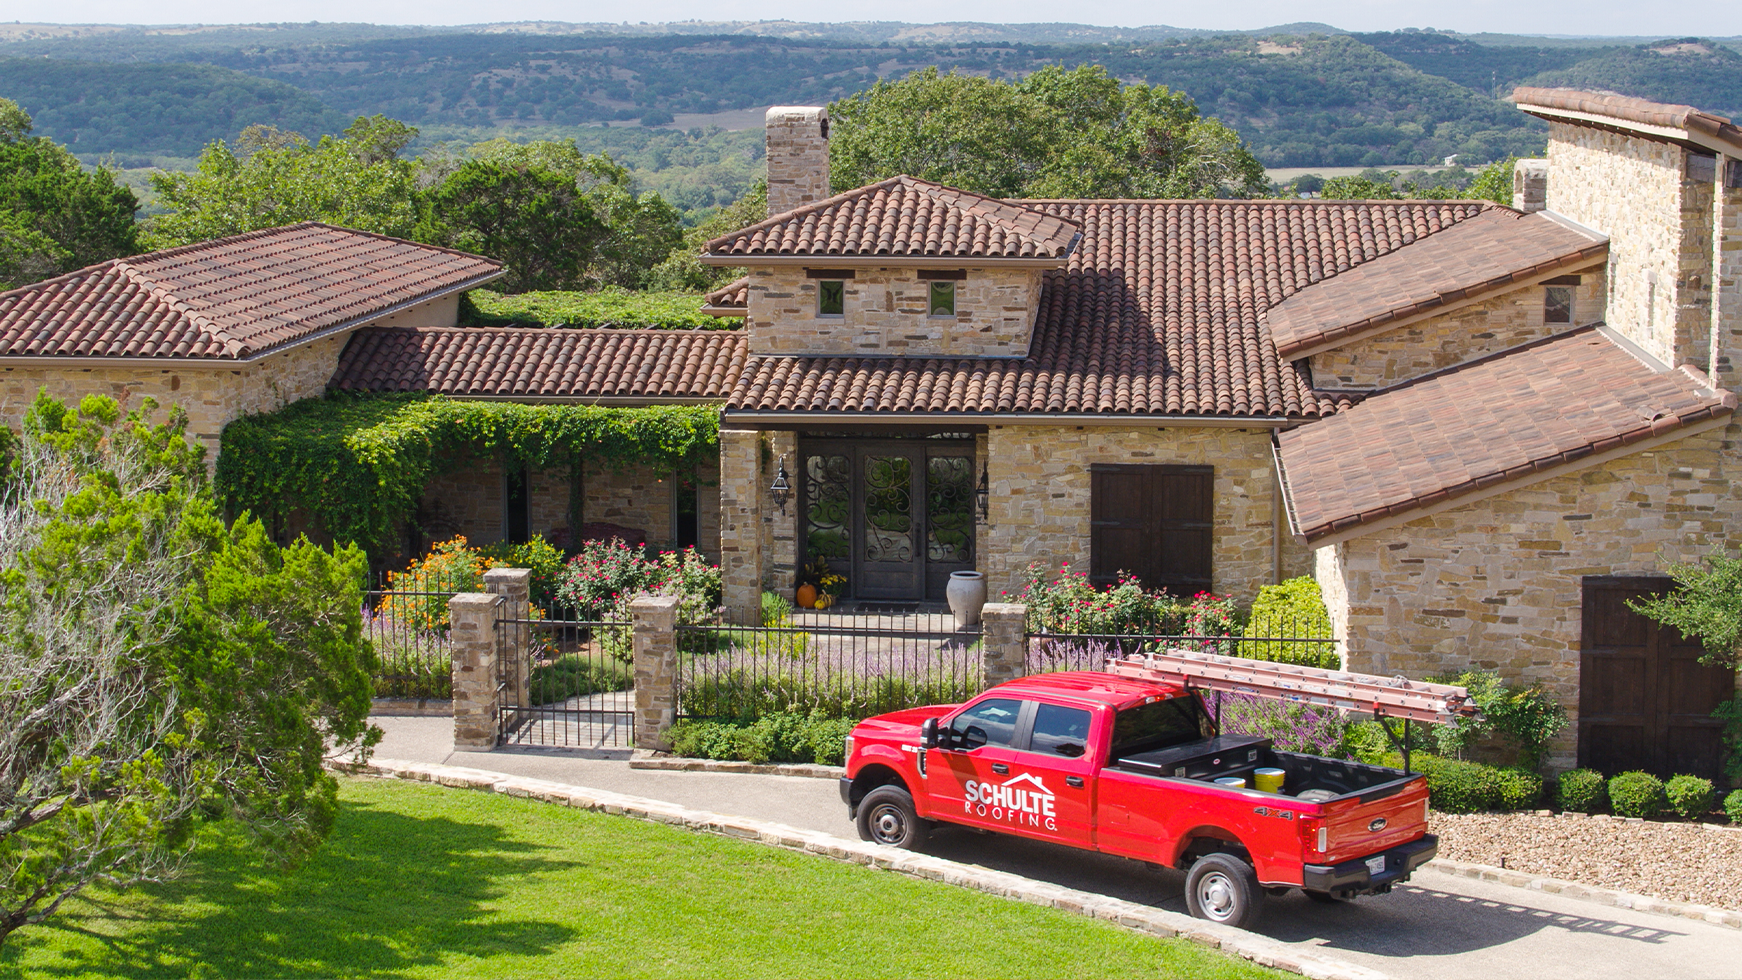 Design and Build your Roof For Your Budget with San Antonio Roofer Schulte Roofing®.